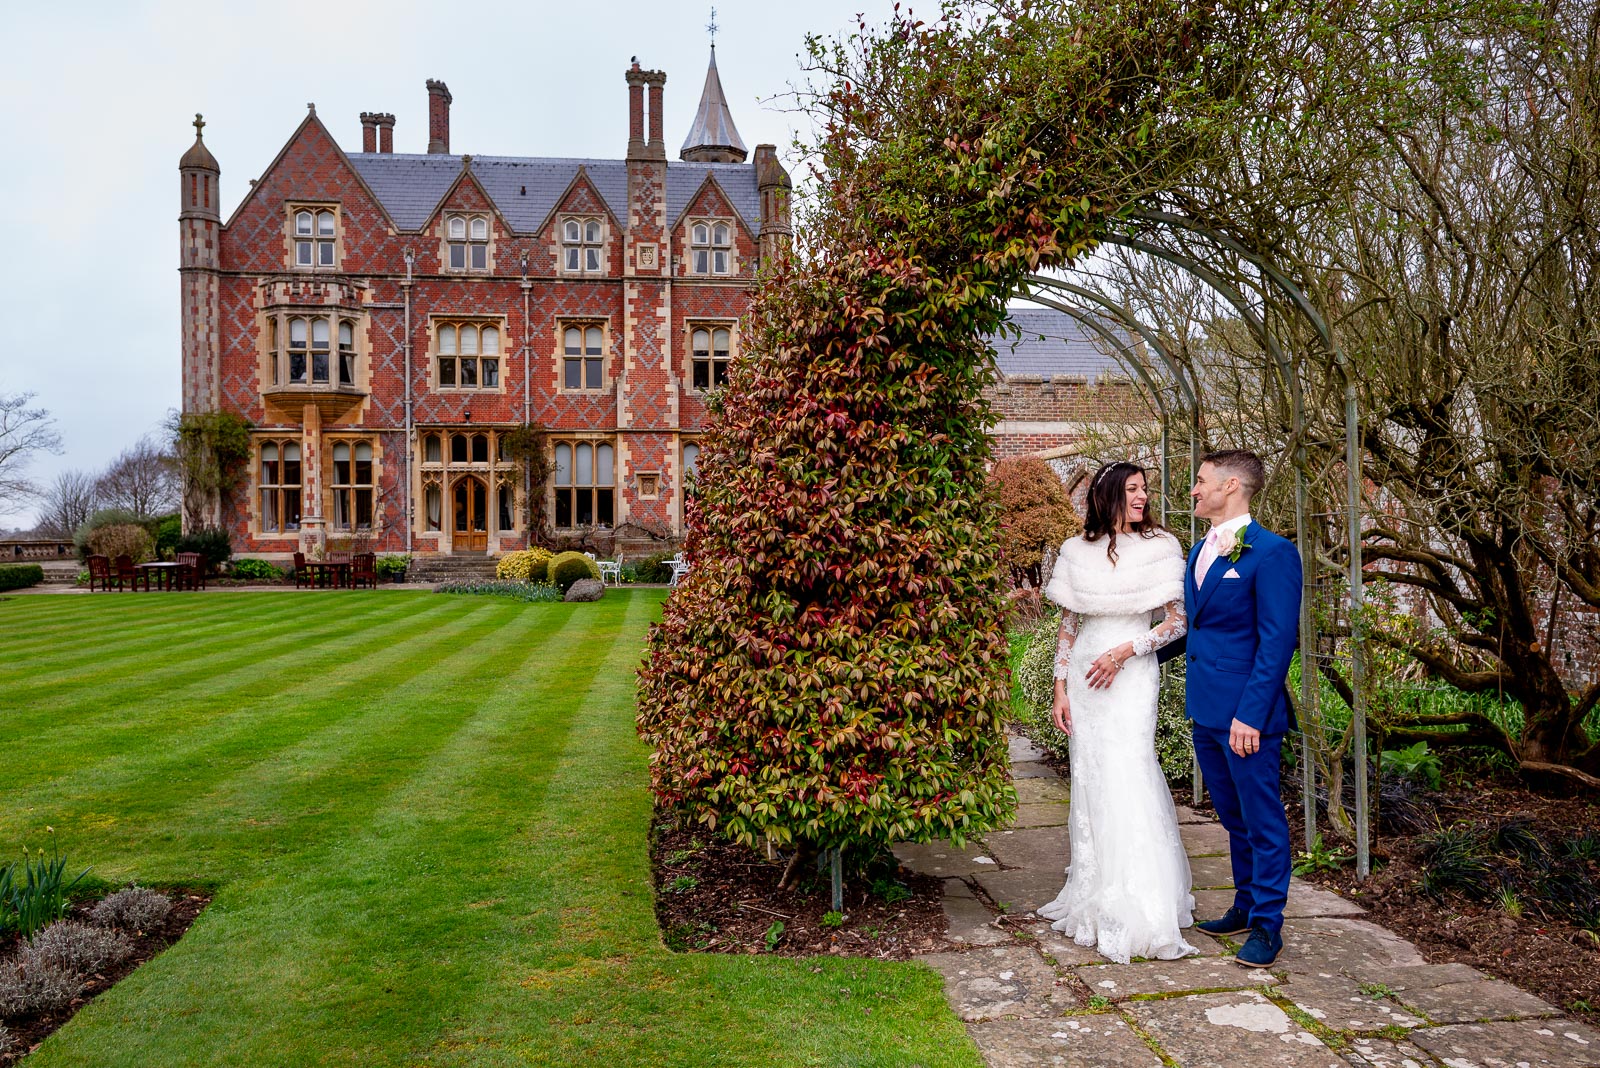 Virgina and Simon pose in the gardens at Horsted Place during their wedding reception.